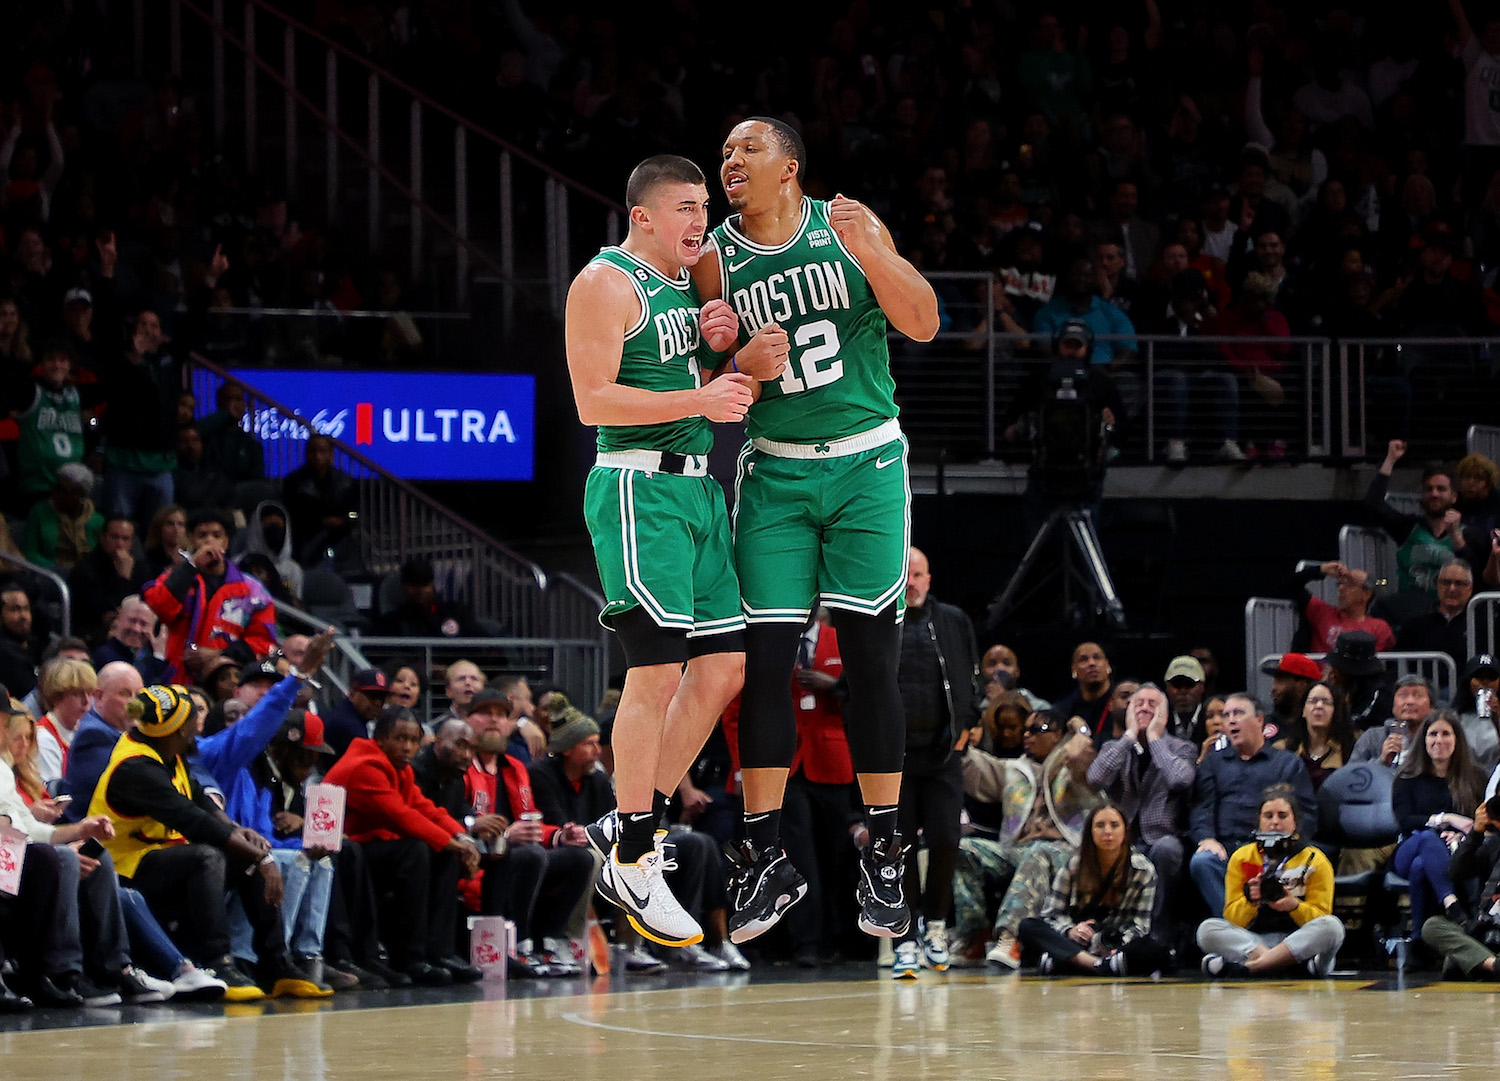 ATLANTA, GEORGIA - NOVEMBER 16: Payton Pritchard #11 of the Boston Celtics reacts with Grant Williams #12 after hitting a three-point basket as time expires in the second quarter against the Atlanta Hawks with at State Farm Arena on November 16, 2022 in Atlanta, Georgia. NOTE TO USER: User expressly acknowledges and agrees that, by downloading and or using this photograph, User is consenting to the terms and conditions of the Getty Images License Agreement. (Photo by Kevin C. Cox/Getty Images)